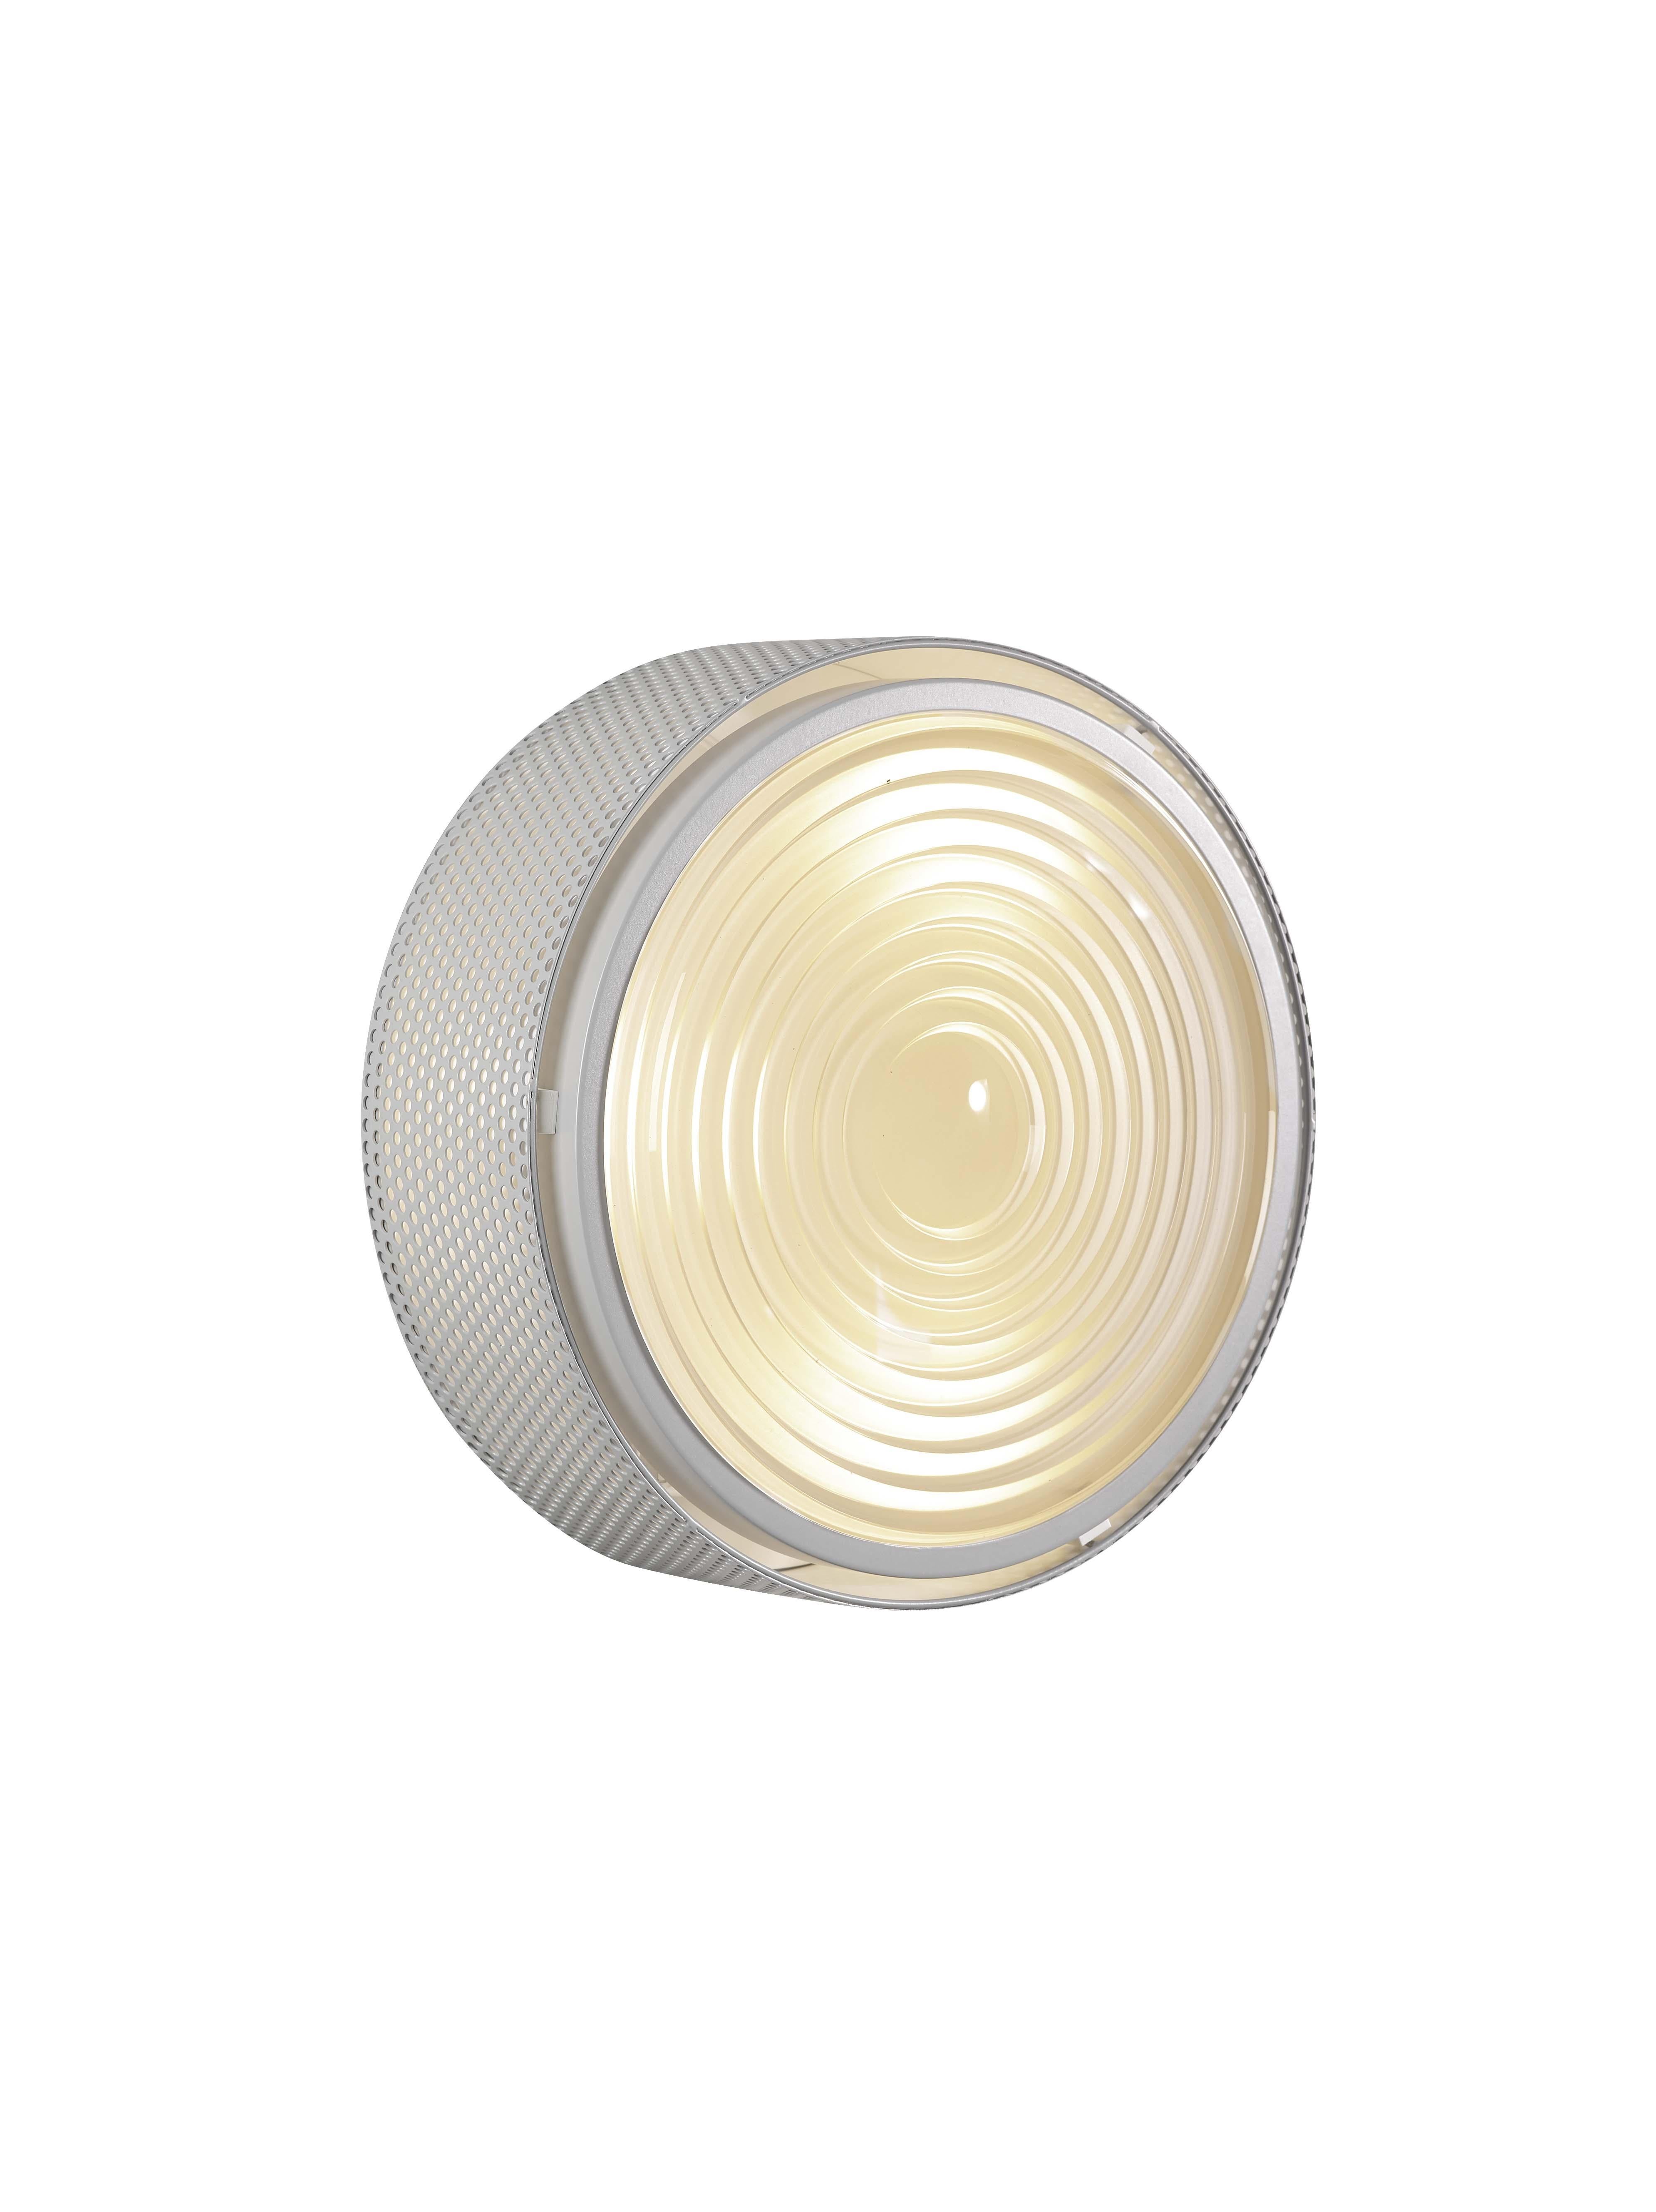 Aluminum Large Pierre Guariche 'G13' Wall or Ceiling Light for Sammode Studio in Gray For Sale